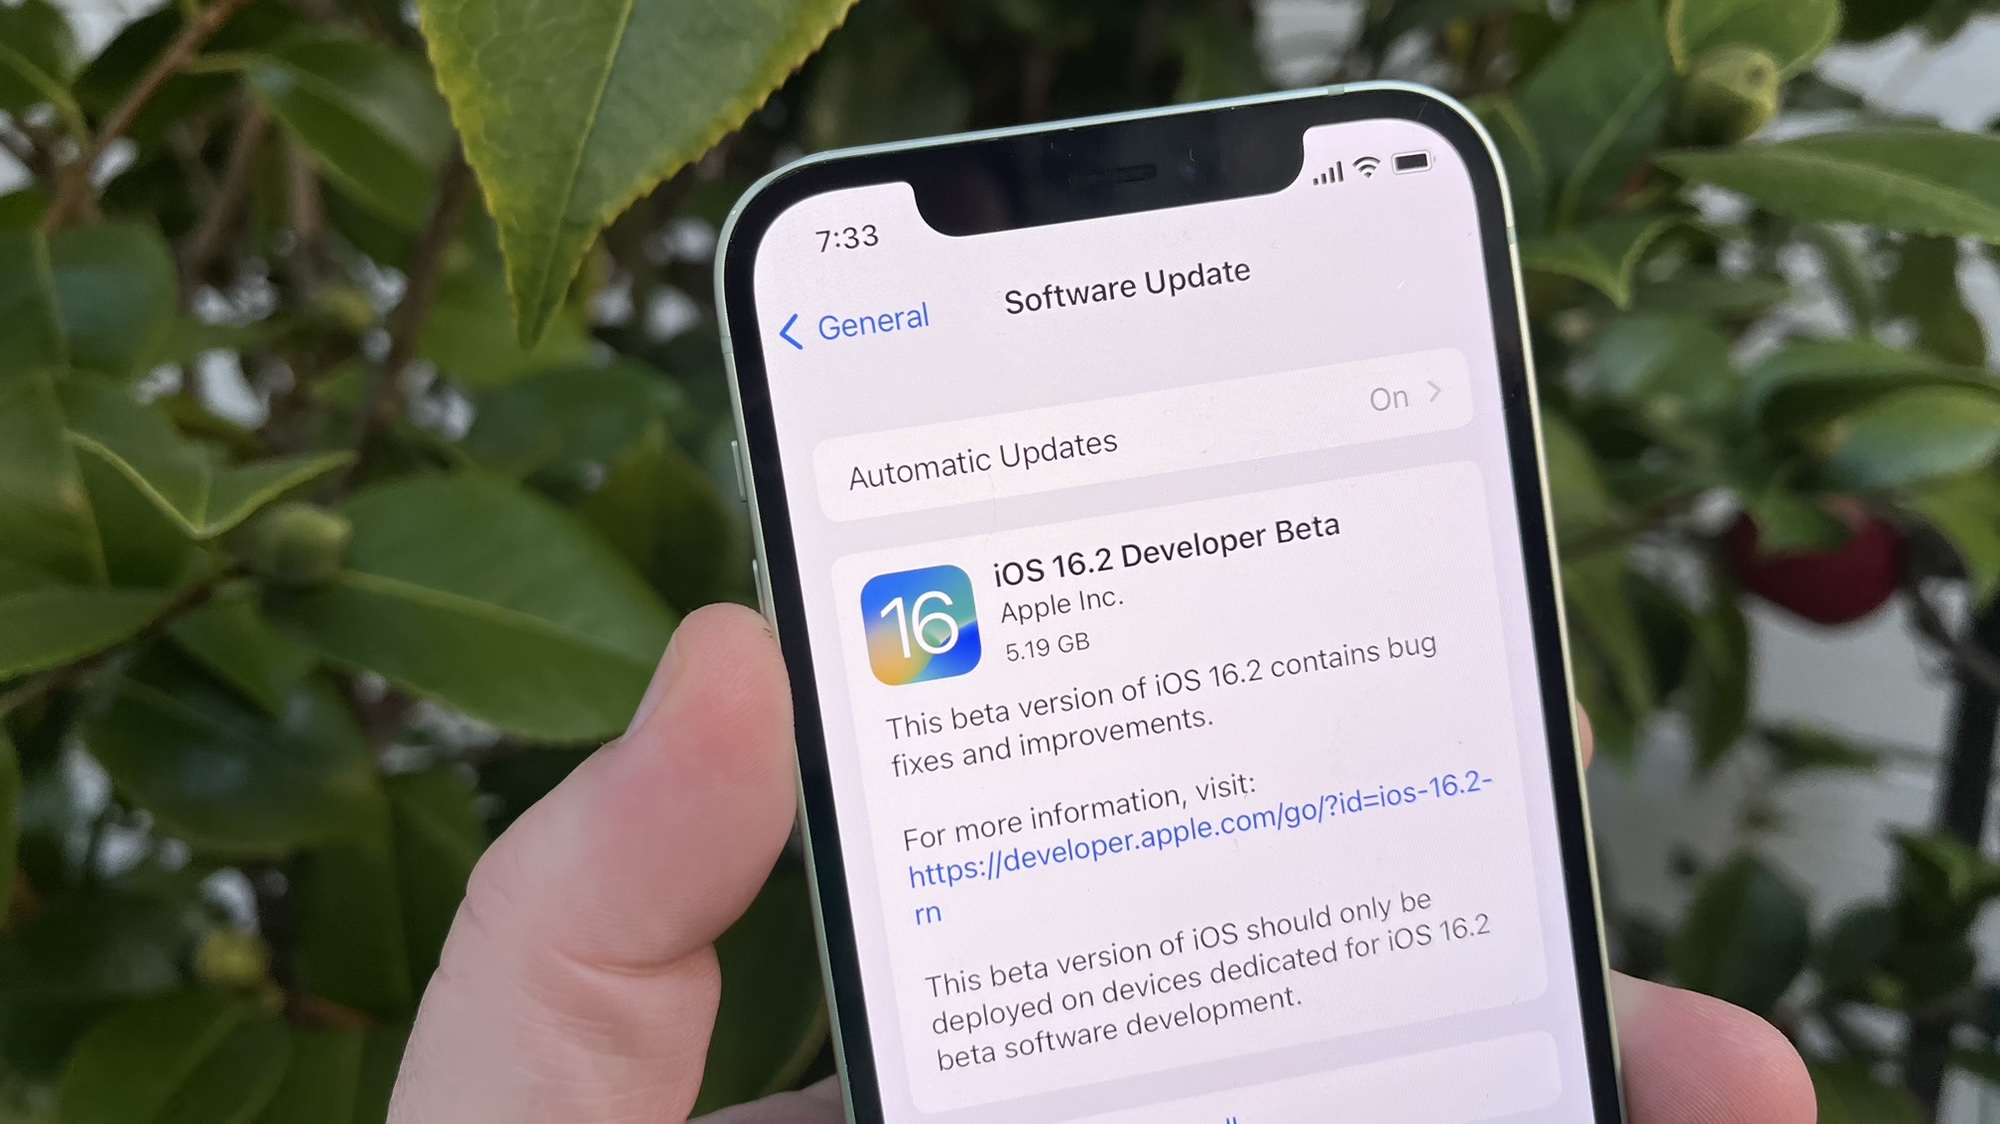 iOS 16.2 beta 1 download screen on iPhone in front of plant